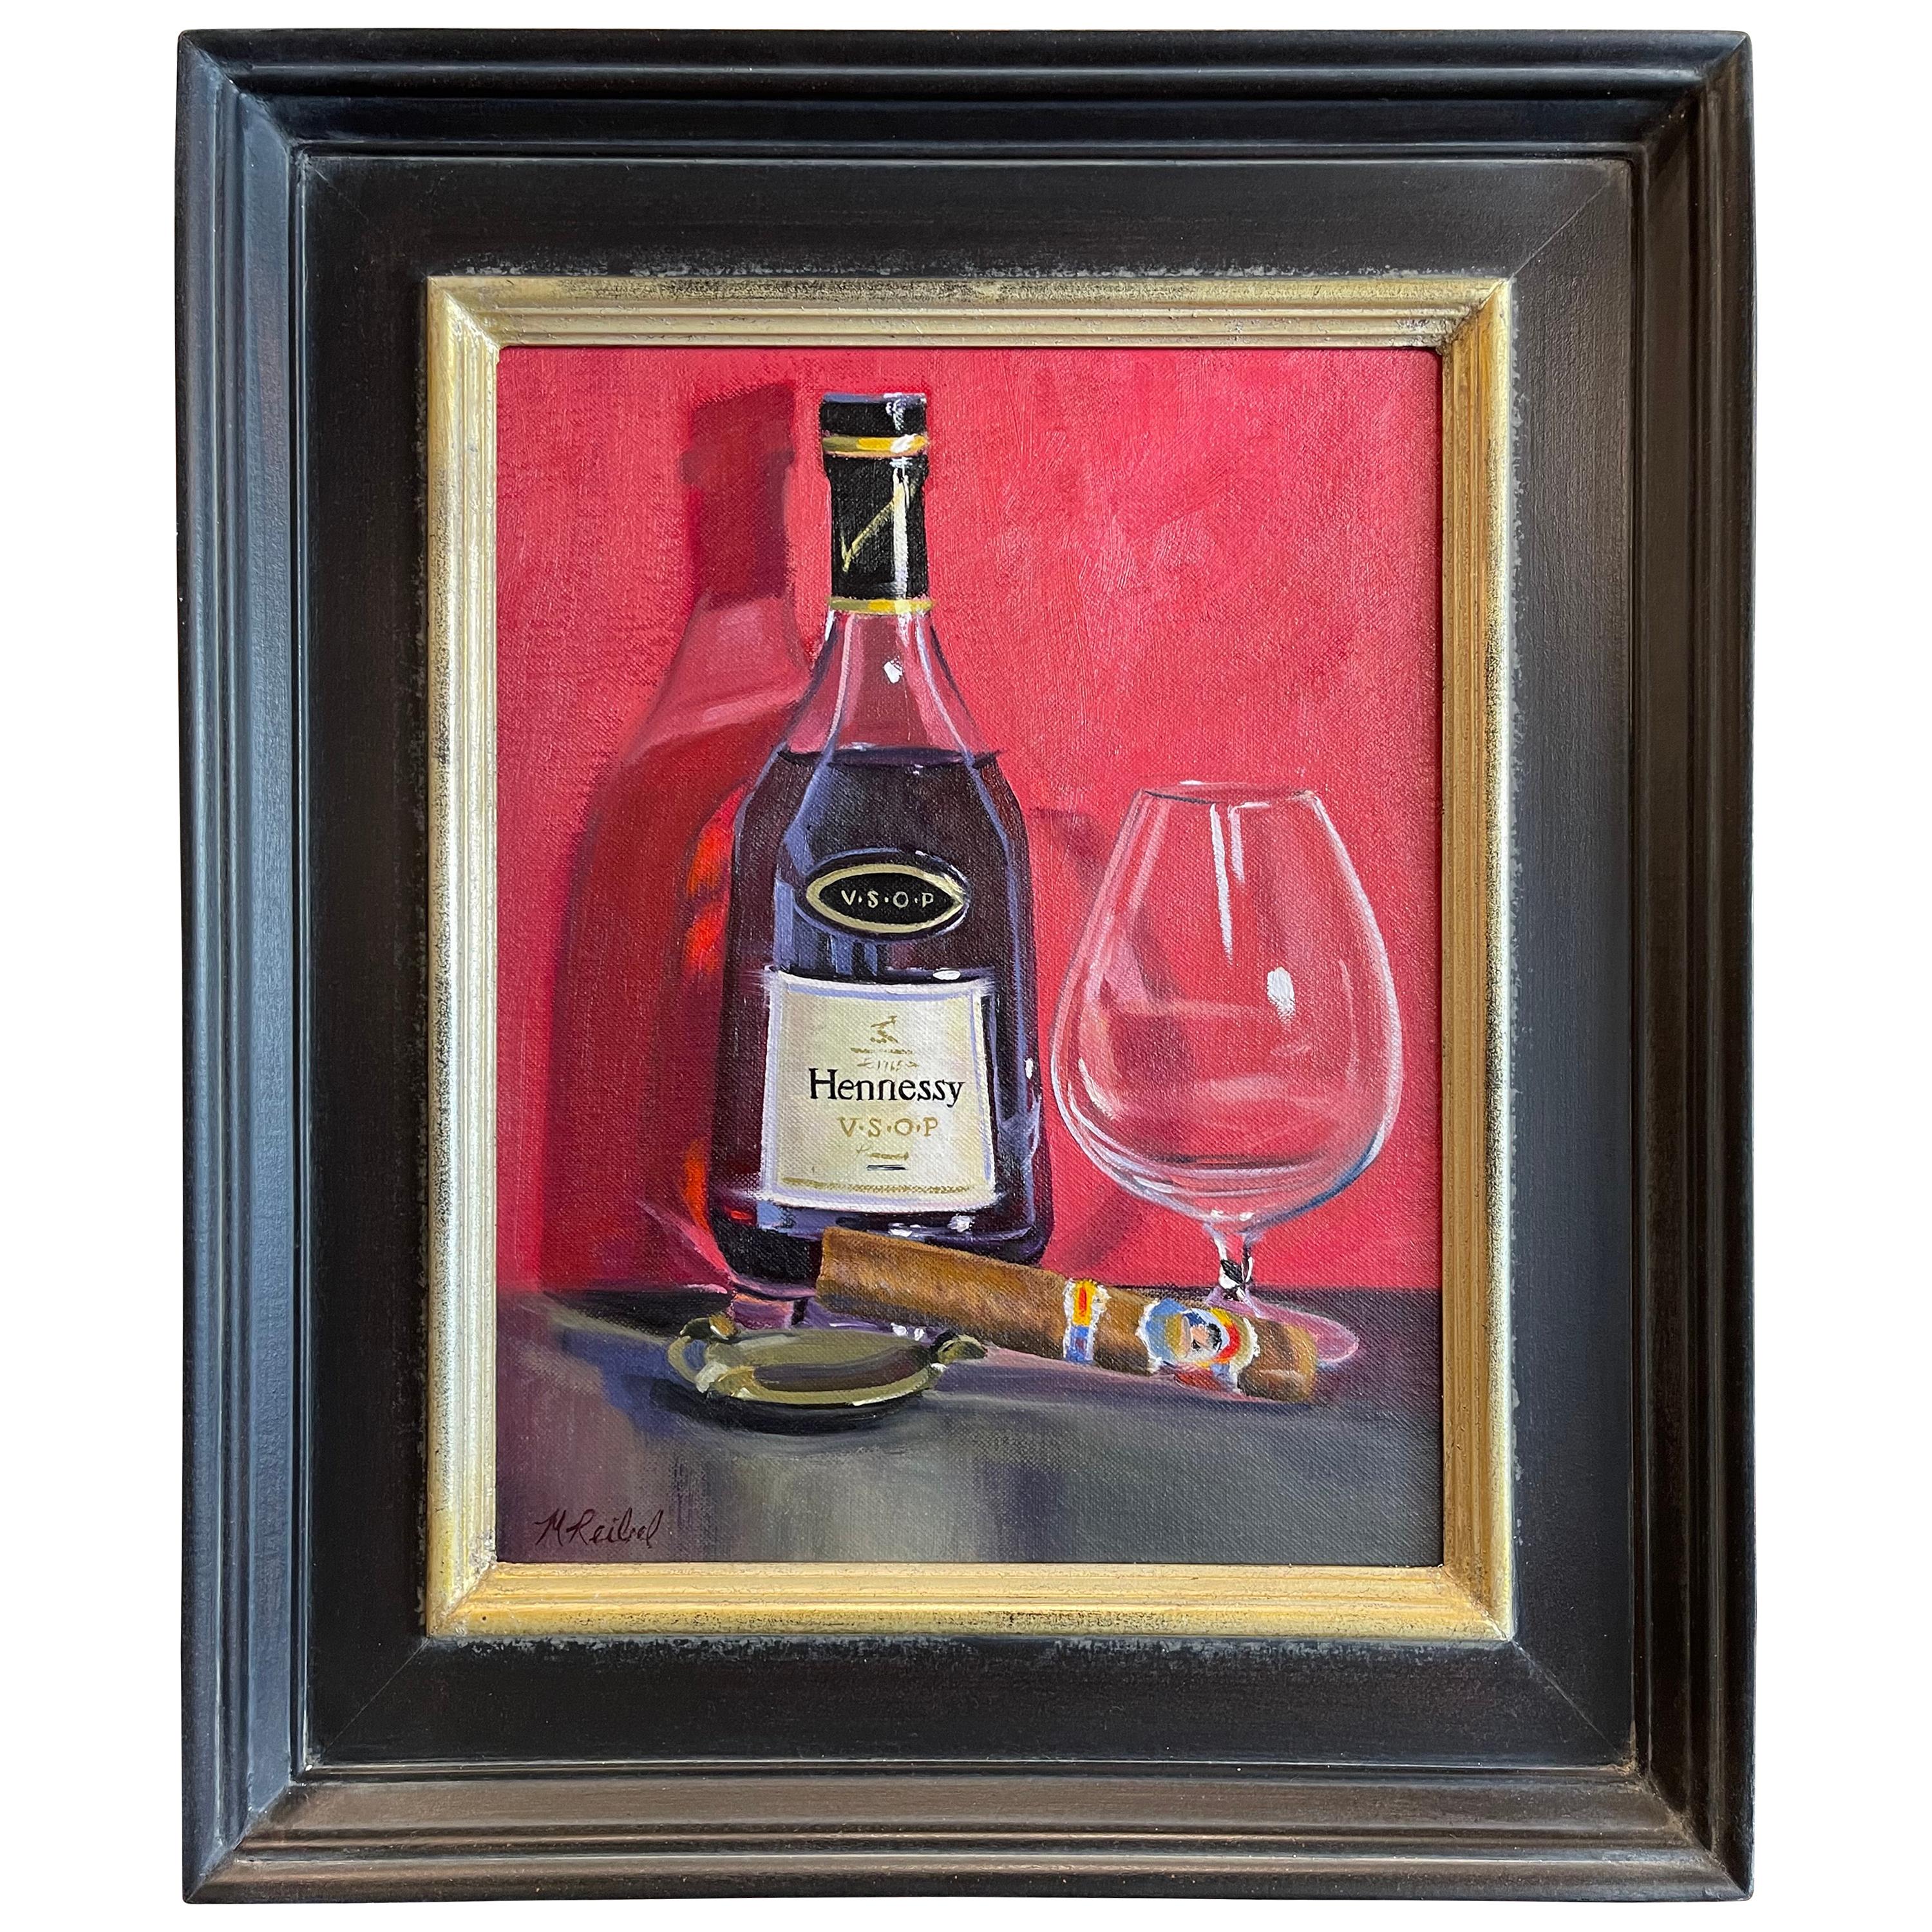 Oil on Canvas Framed Painting "Hennessy and La Aroma de Cuba", Michael Reibel